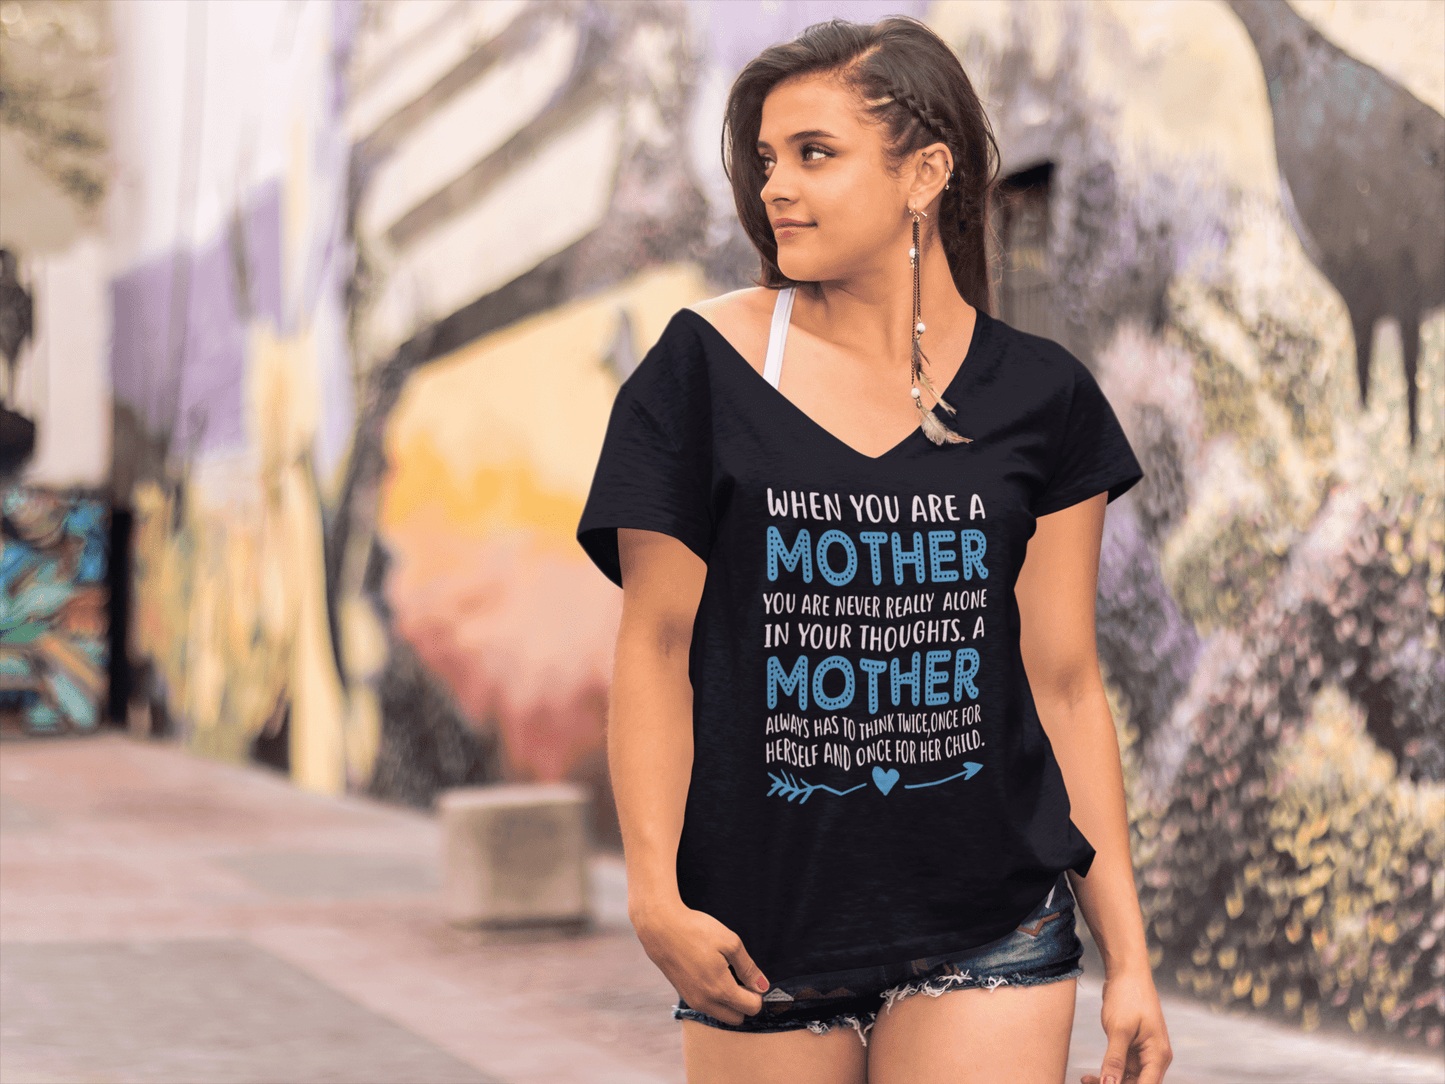 ULTRABASIC Women's T-Shirt When You Are a Mother You are Never Alone - Tee Shirt for Moms